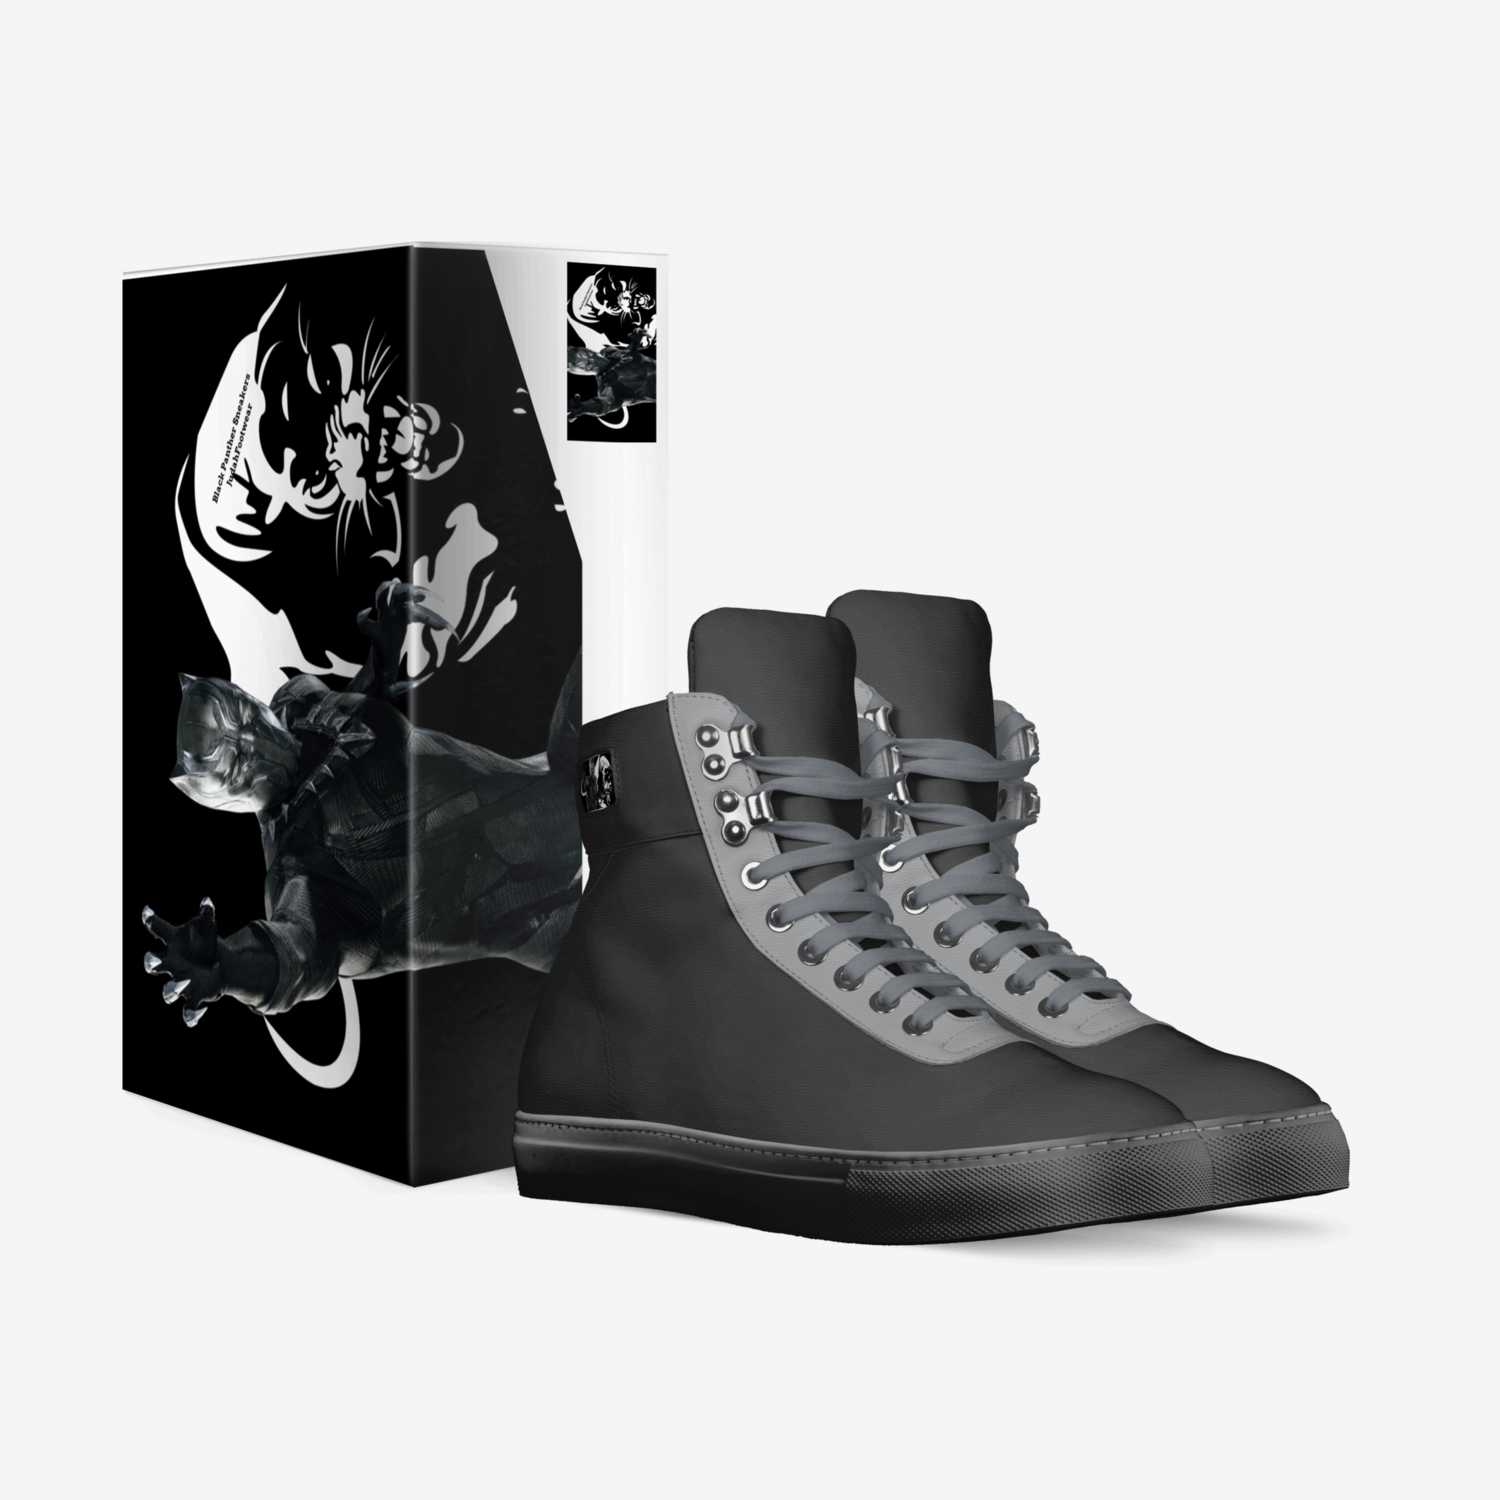 BlackPanther custom made in Italy shoes by V Greavx | Box view